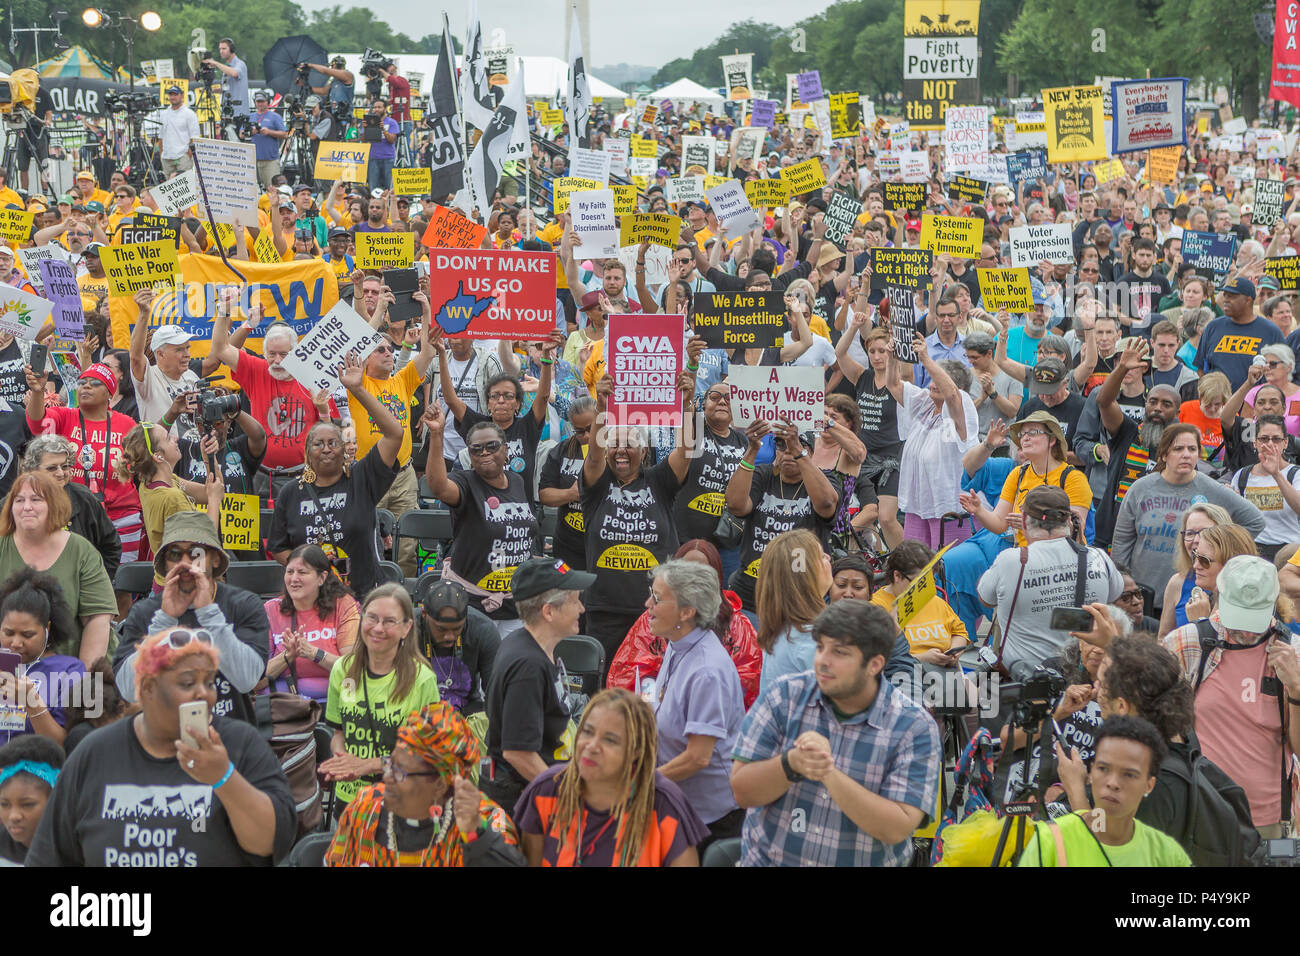 Washington Dc, United States. 23rd June, 2018. More than 10,000 participants in the Poor People's Campaign: A National Call for Moral Revival converged on the U.S. Capitol. The march marks the culmination of a historic six-week engagement of nonviolent direct action across the United State, which challenged America's political, economic, and moral structures. Credit: Michael Nigro/Pacific Press/Alamy Live News Stock Photo